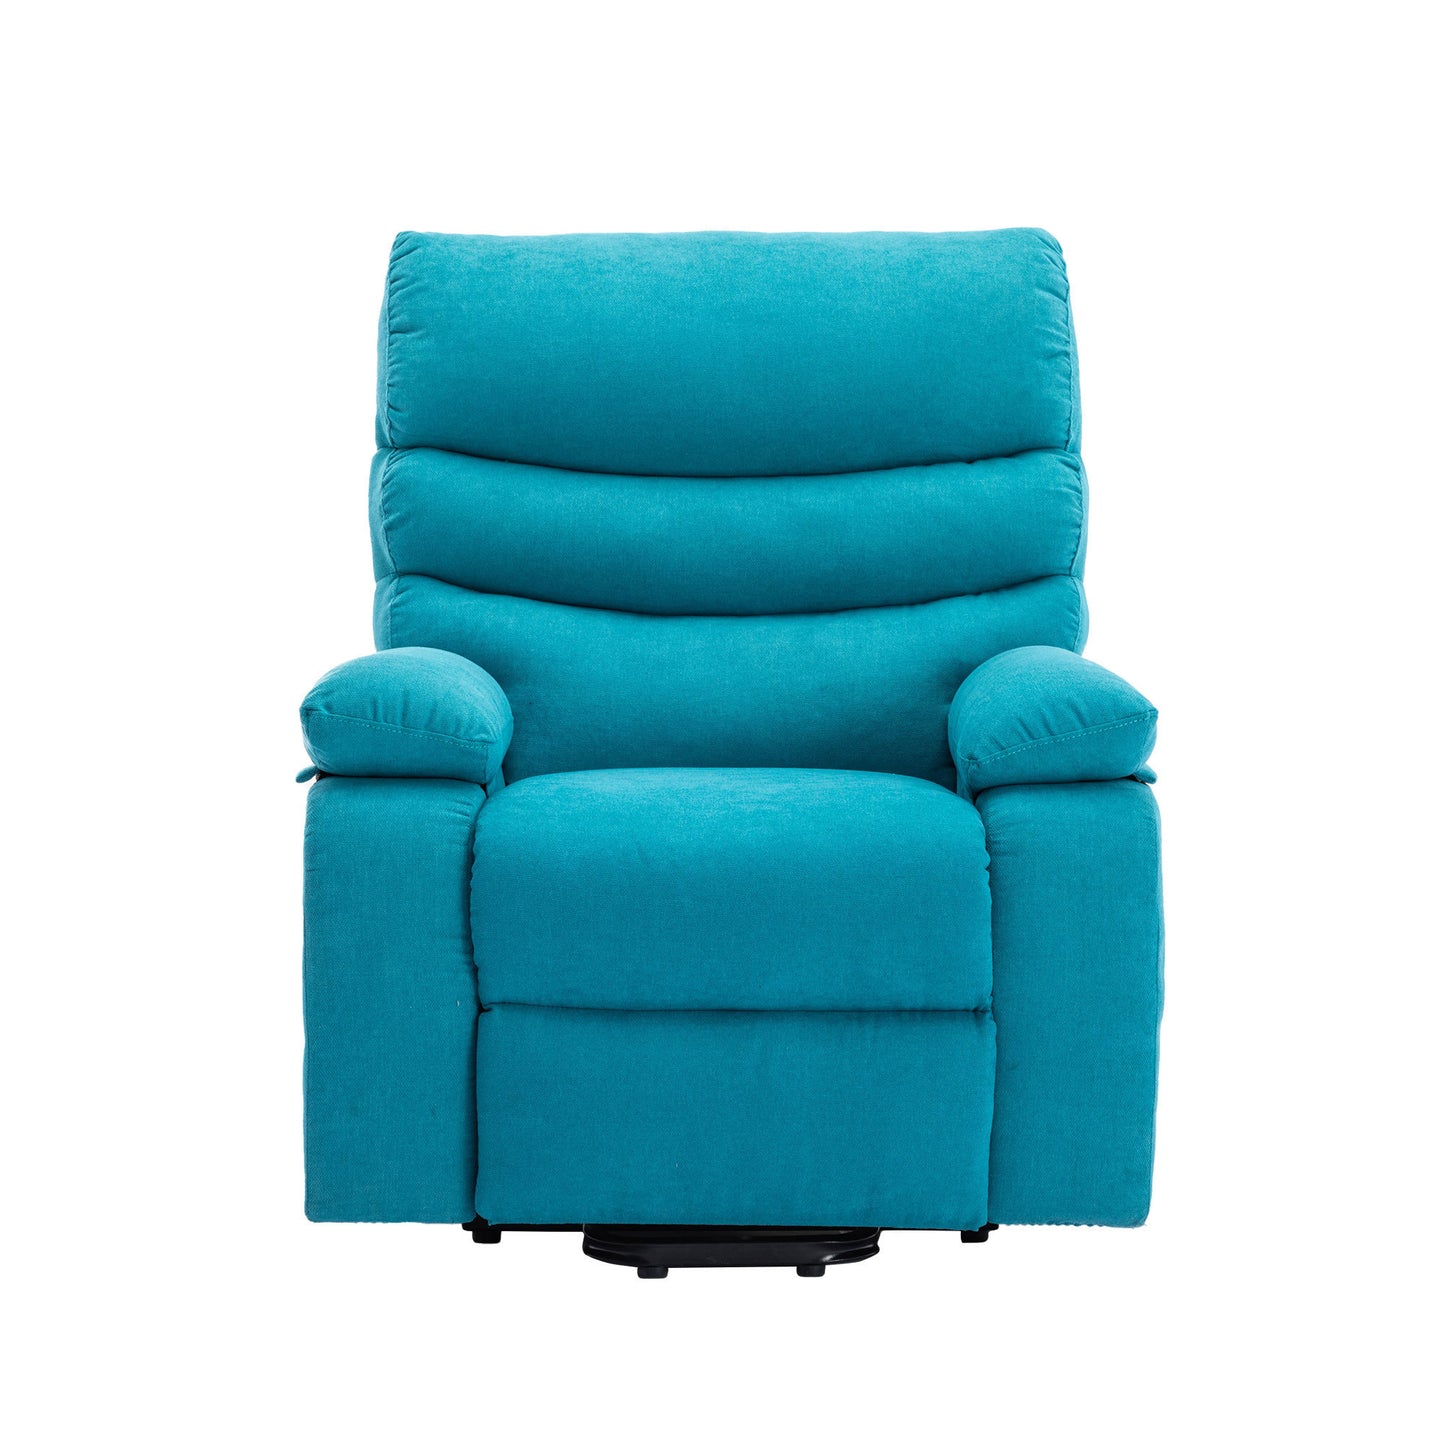 Blue Chenille Power Lift Recliner Chair with Heating, Vibration Massage, and USB Charging